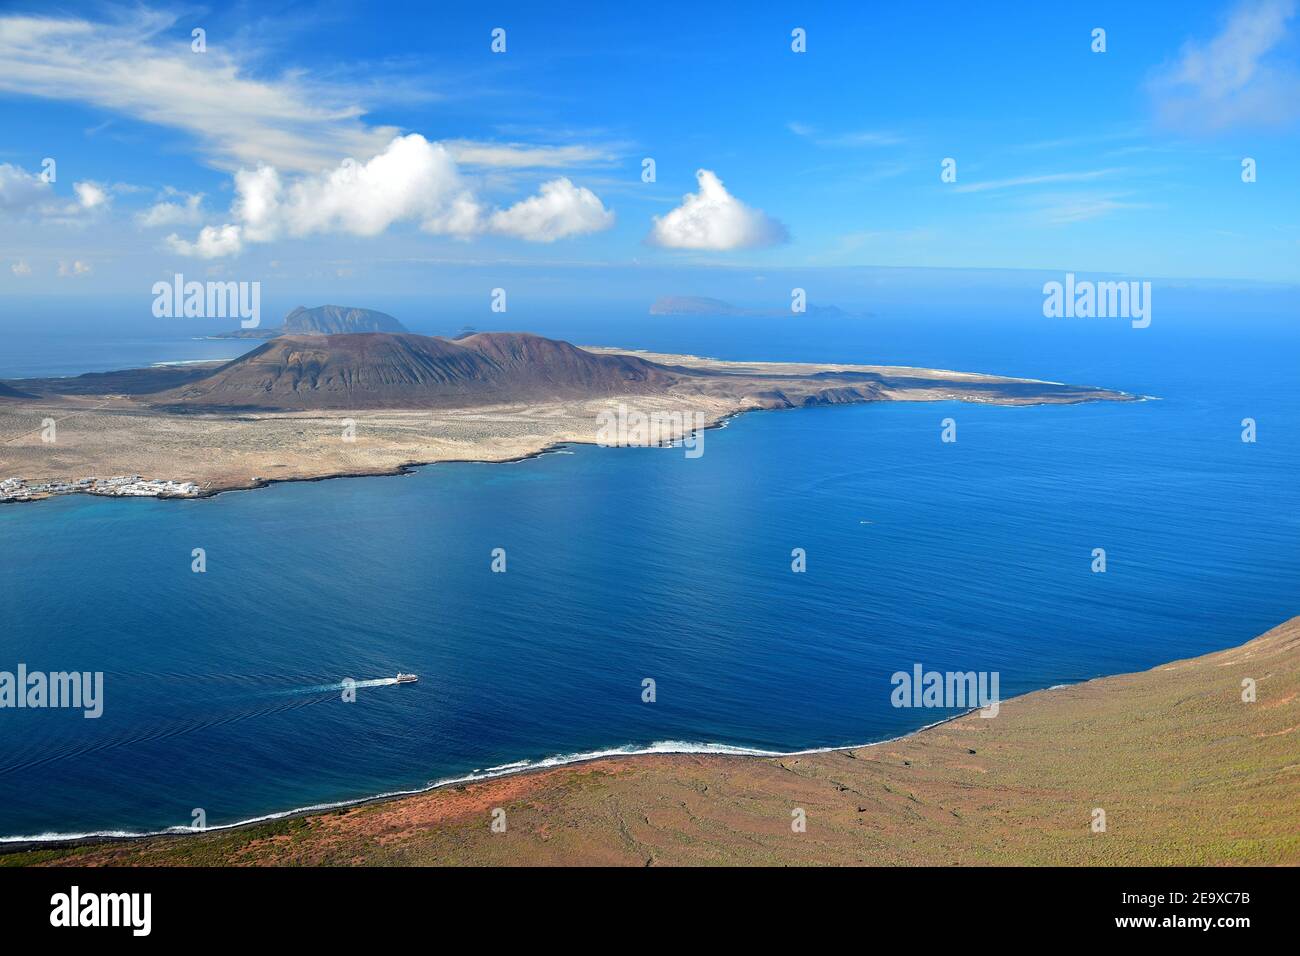 La Graciosa, a small volcanic island in the north of Lanzarote, Spain. Blue ocean and a blue sky with some white clouds. Far in the background the Isl Stock Photo